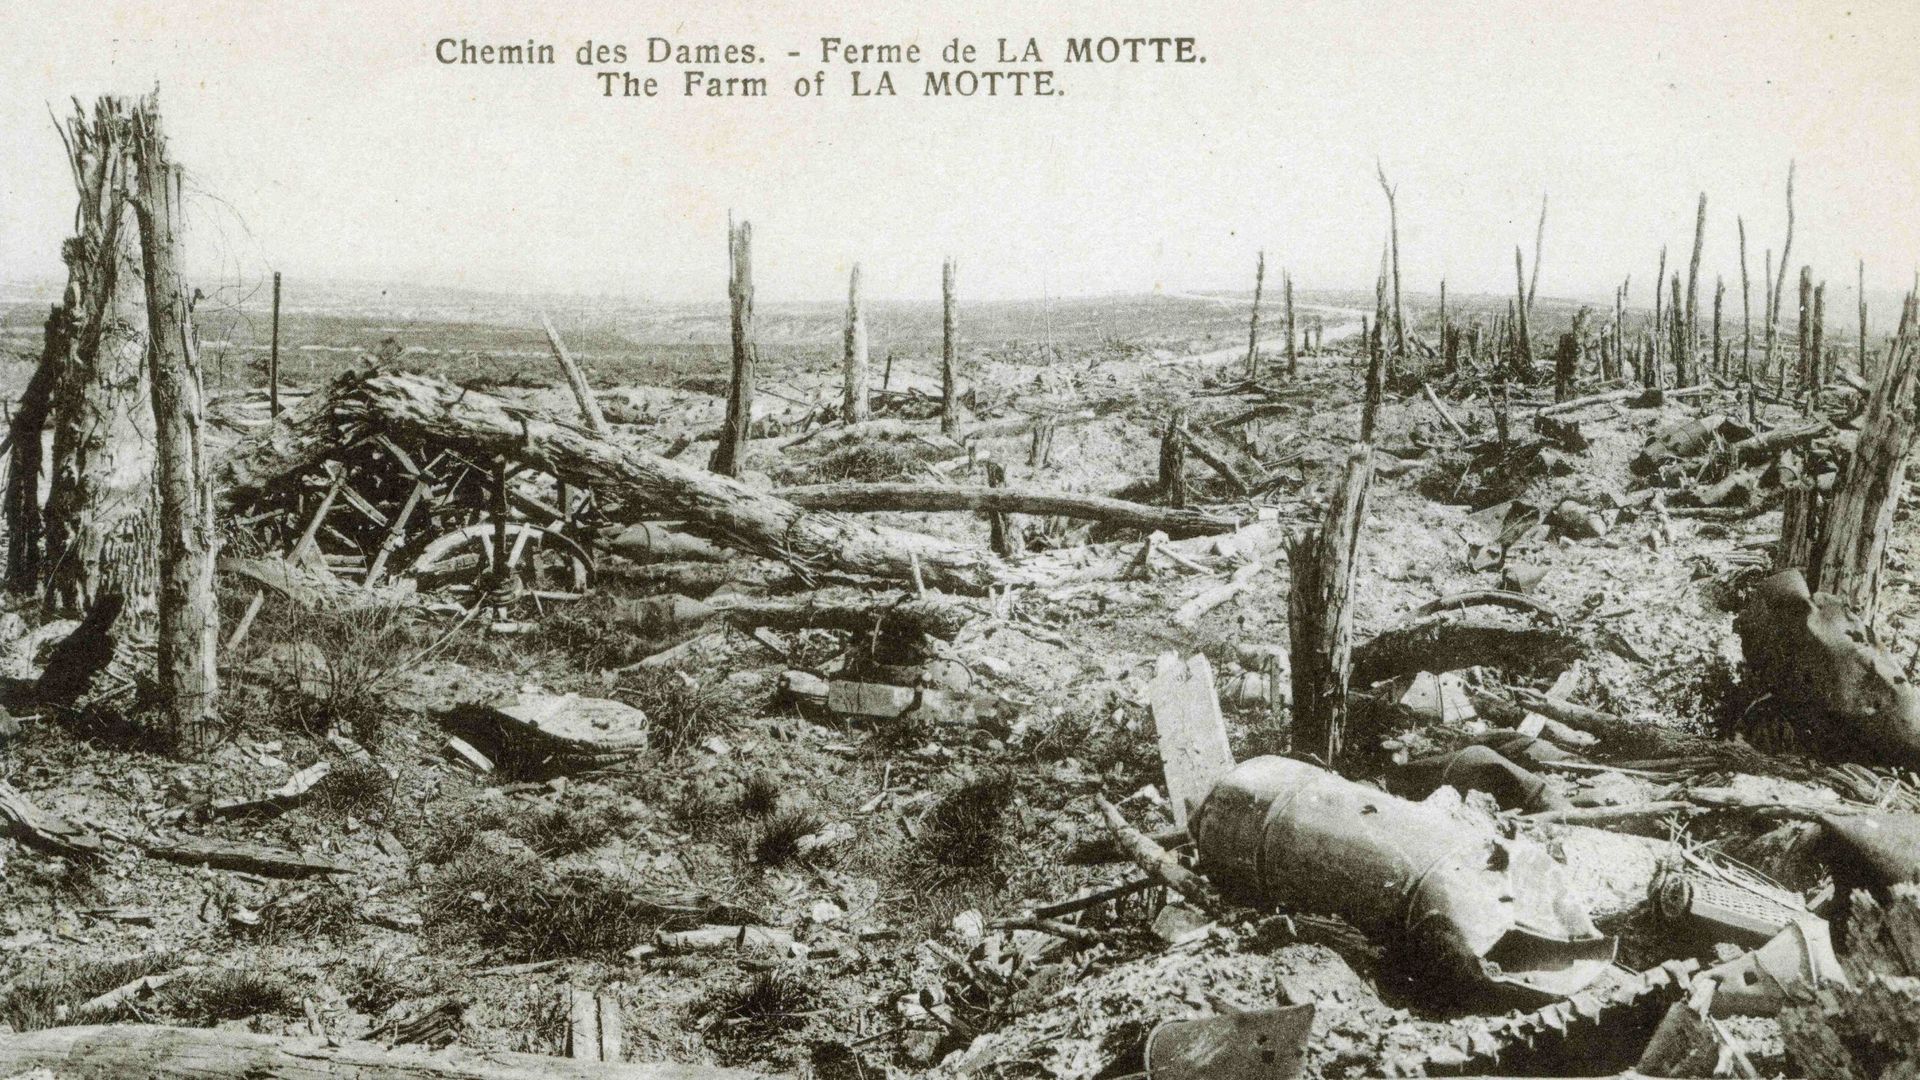 Ruins and desolation on the Chemin des Dames.